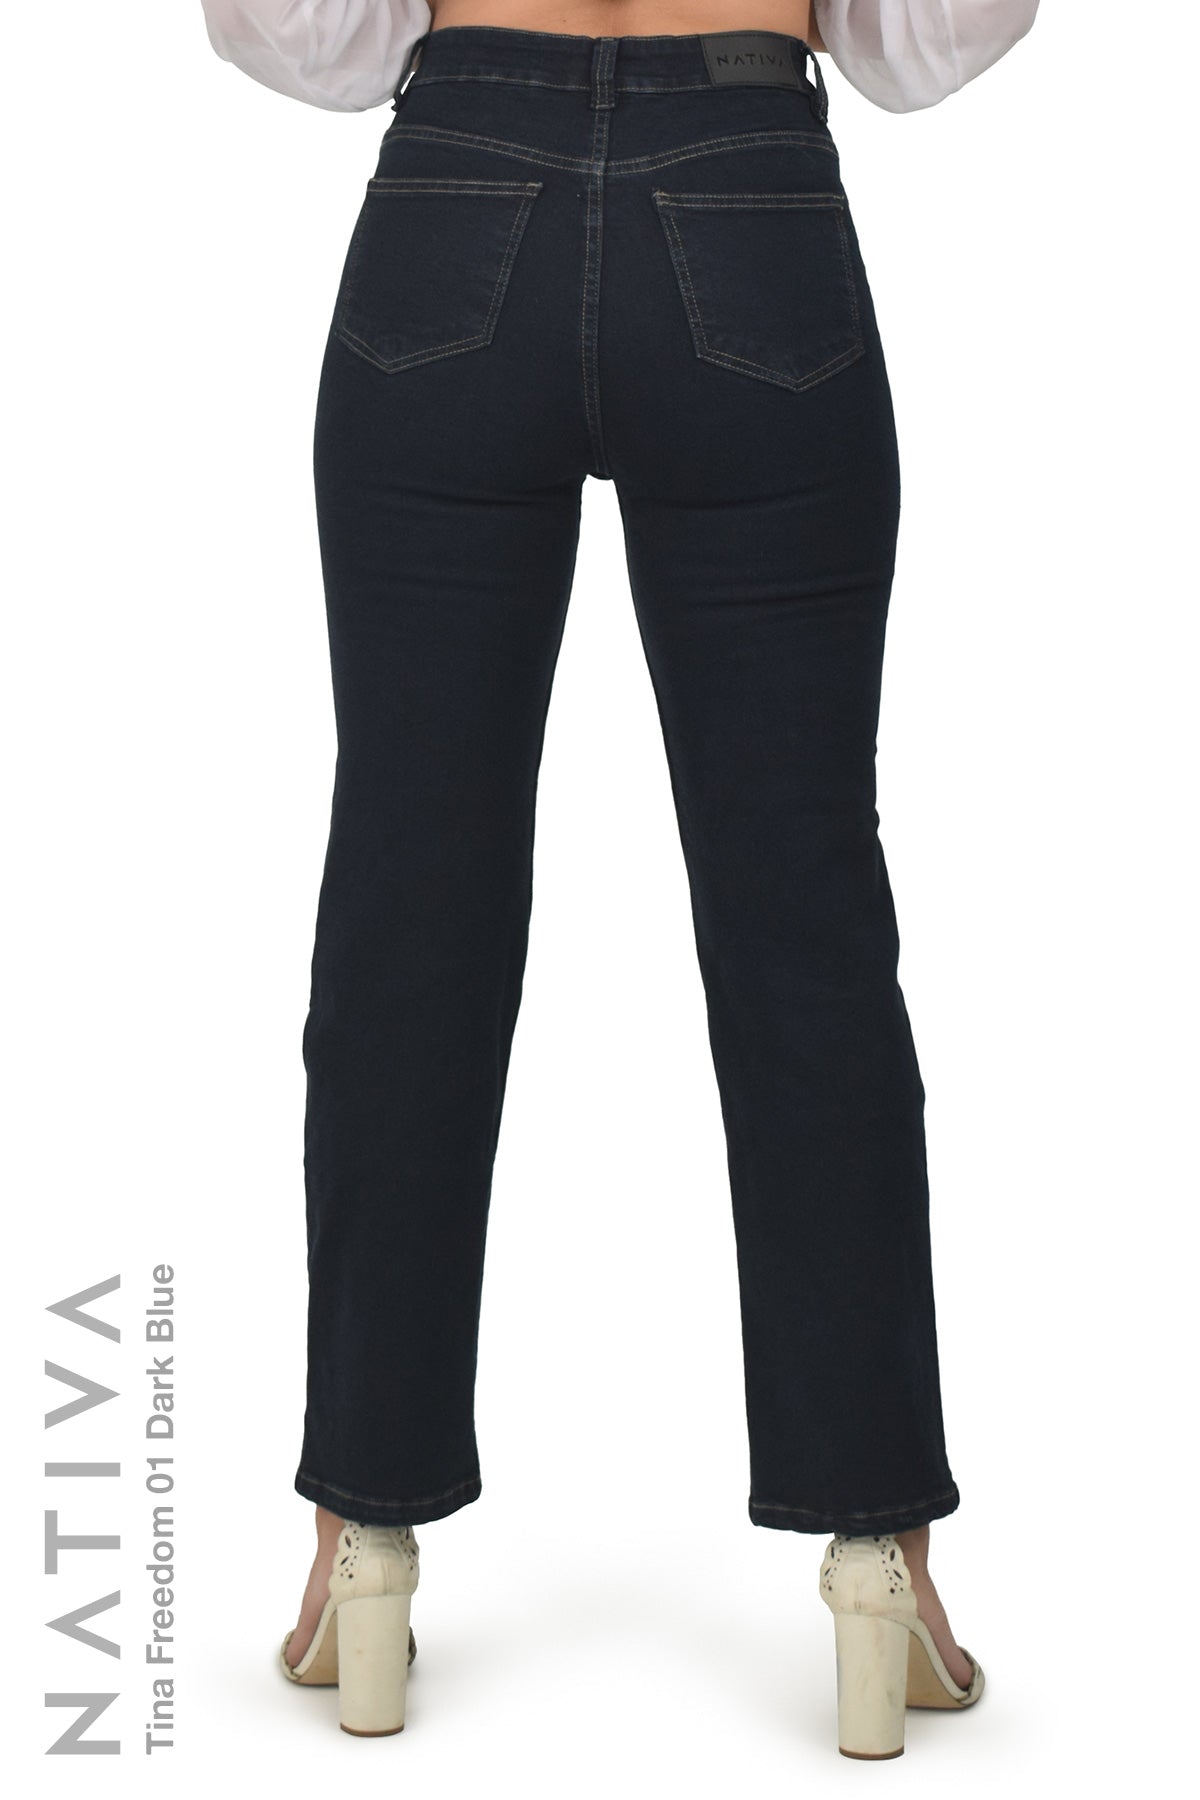 NATIVA,STRETCH JEANS, TINA FREEDOM 01 DARK BLUE. High-Rise  Classic Straight Leg Jeans ESFD  (Extreme Stretch Flattering Denim)  Fabric Ultra Comfortable Relaxed Fit  Solid Color